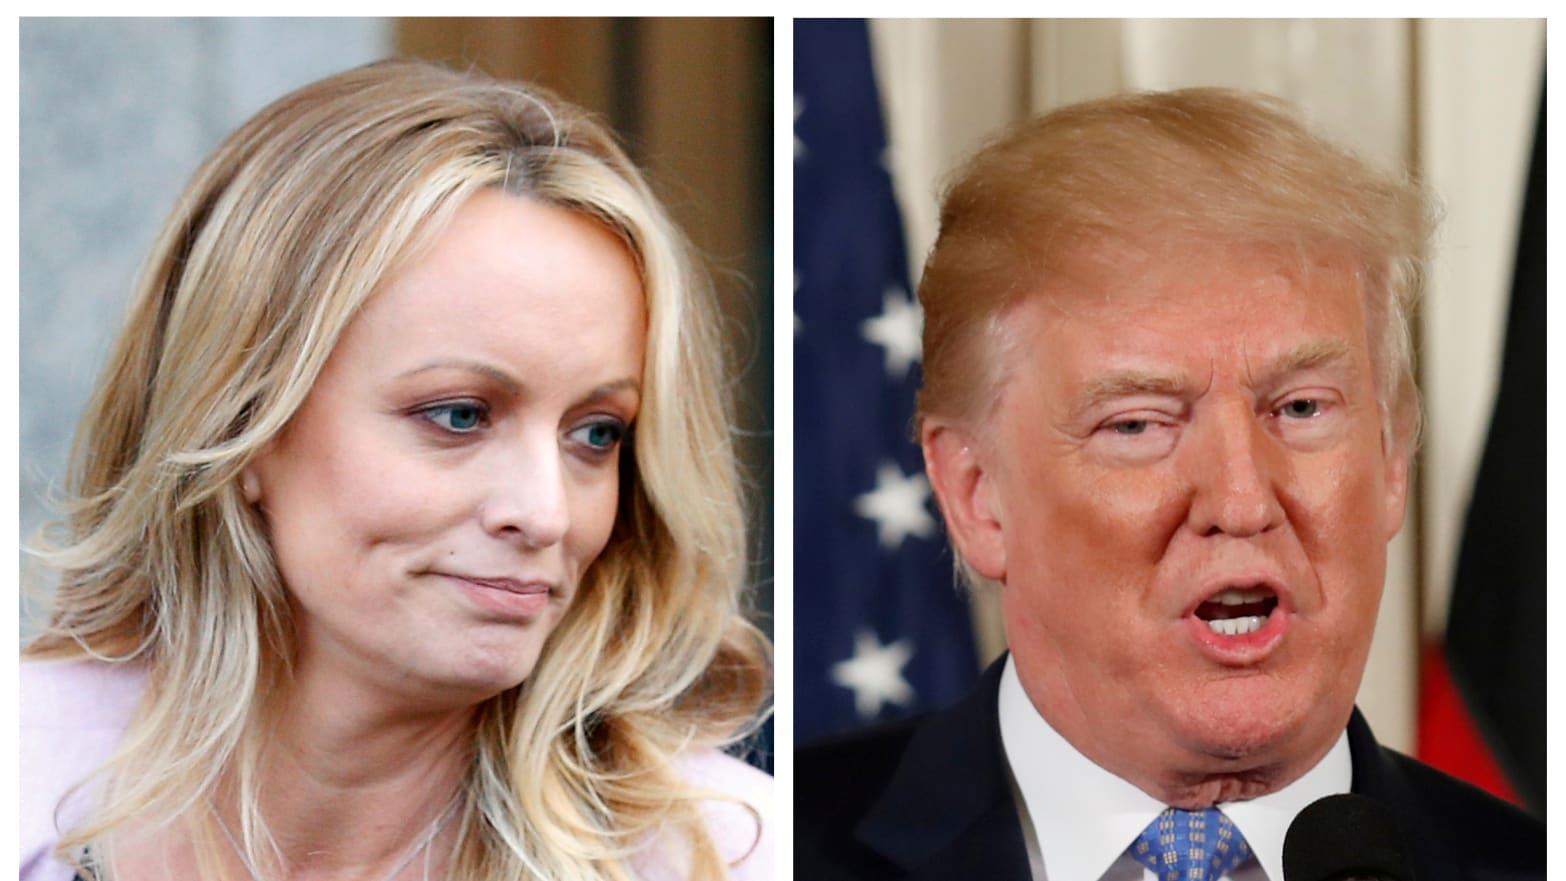 A combination photo shows Adult film actress Stephanie Clifford, also known as Stormy Daniels speaking in New York City, and U.S. President Donald Trump.